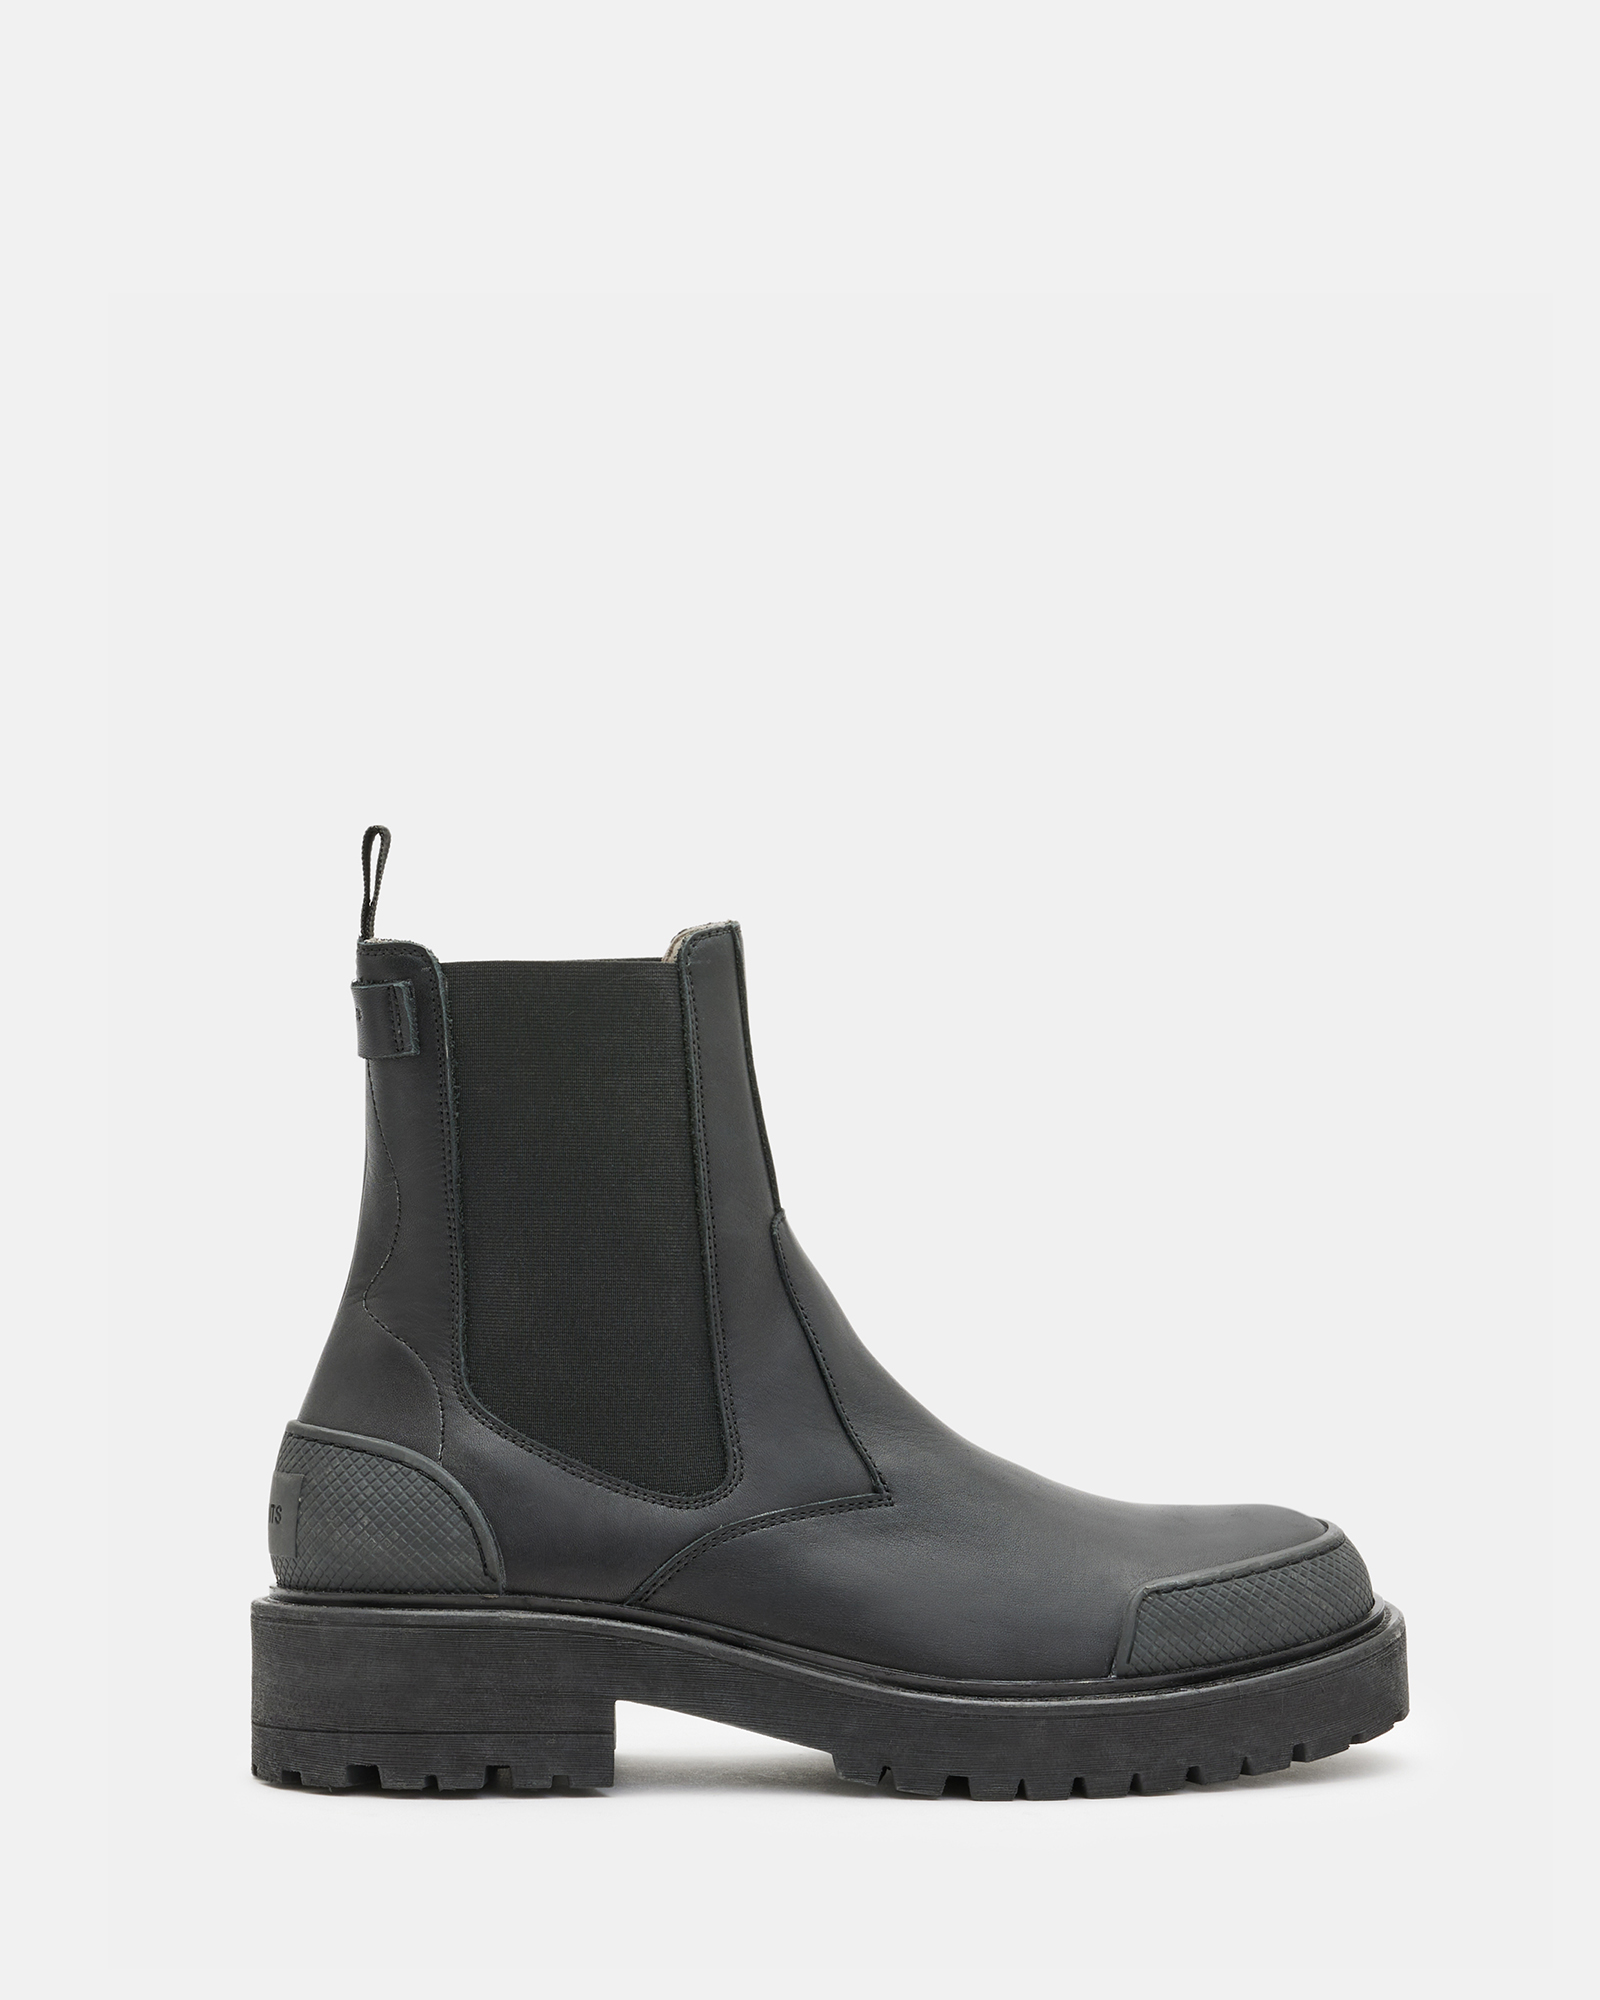 AllSaints Nidd Leather Round Toe Ankle Boots,, Black, Size: UK